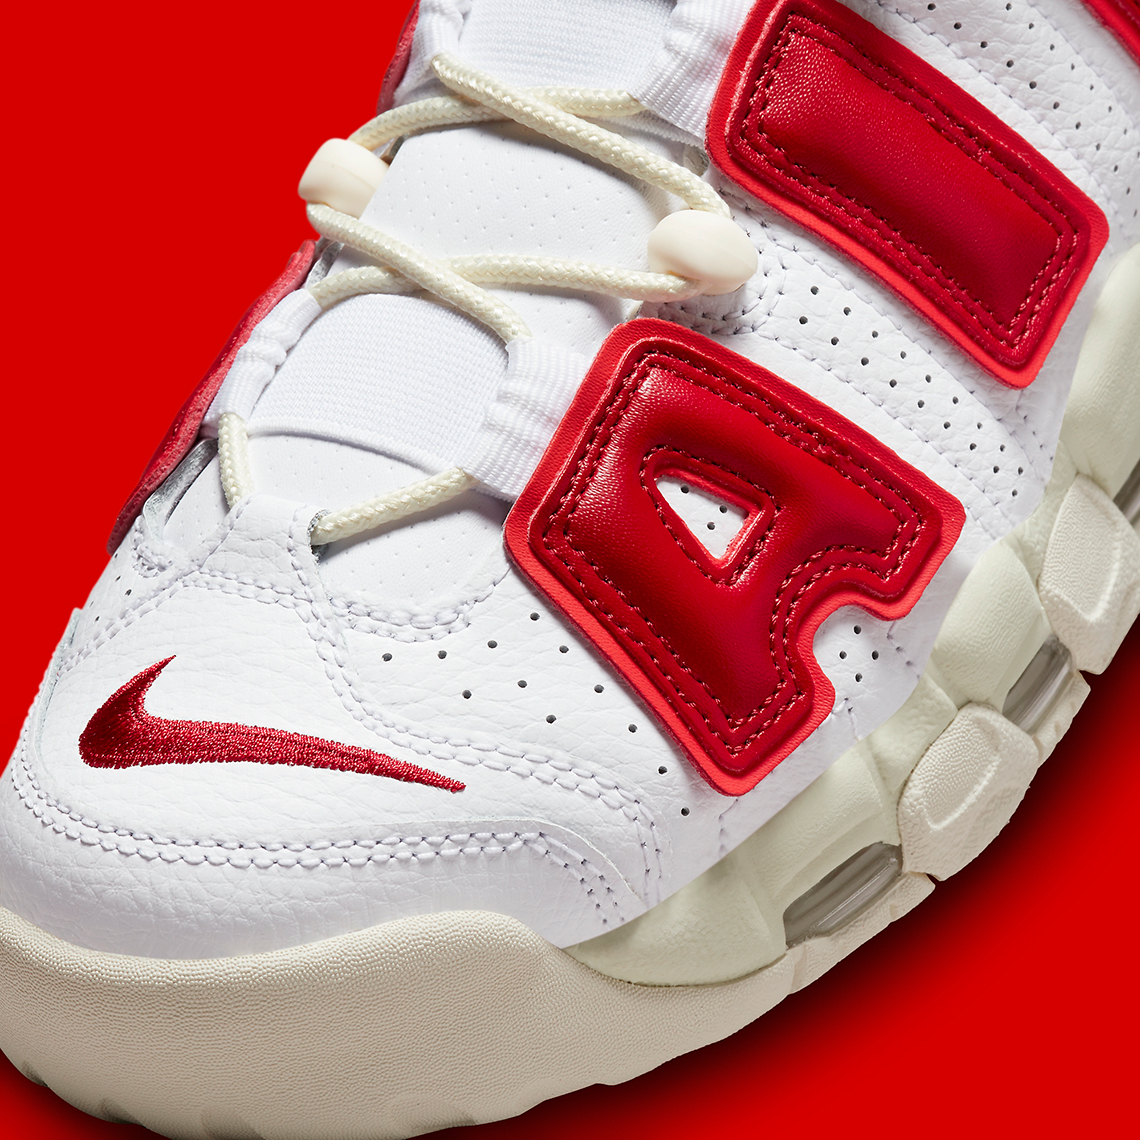 Nike Air More Uptempo White Red Sail Fn3497 100 7